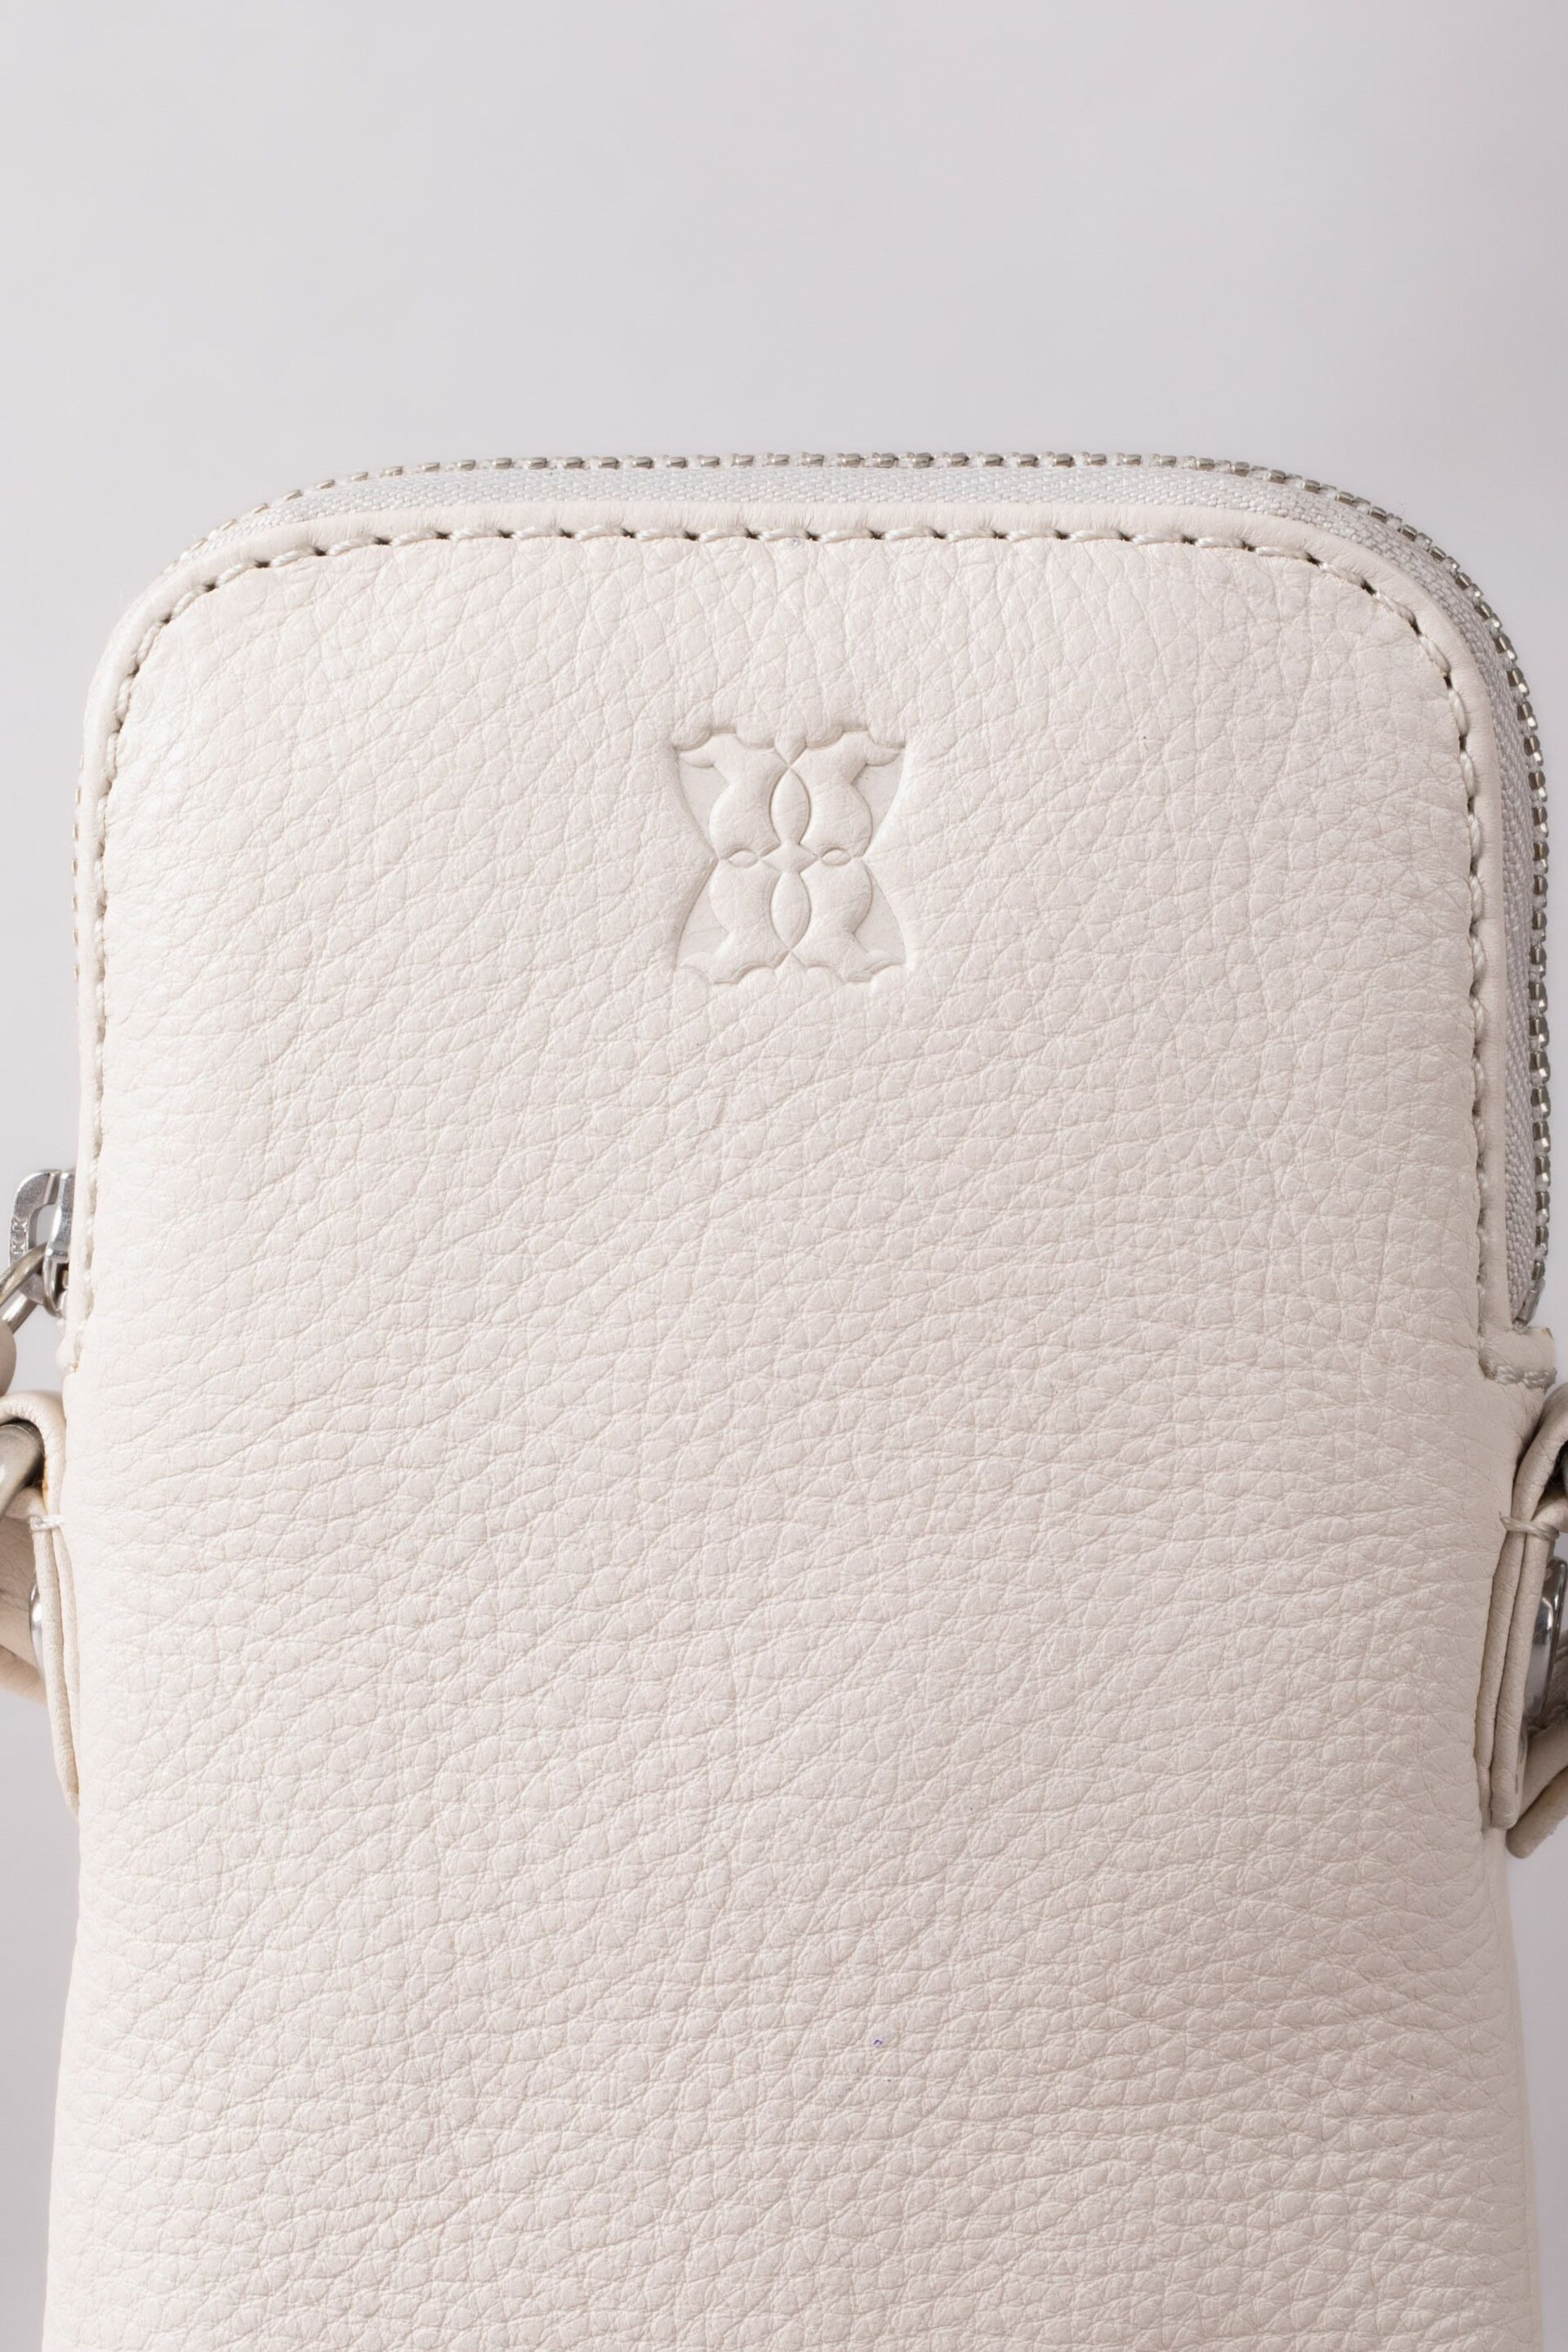 Lakeland Leather White Lakeland Leather Coniston Leather Cross Body Phone Pouch - Image 4 of 6